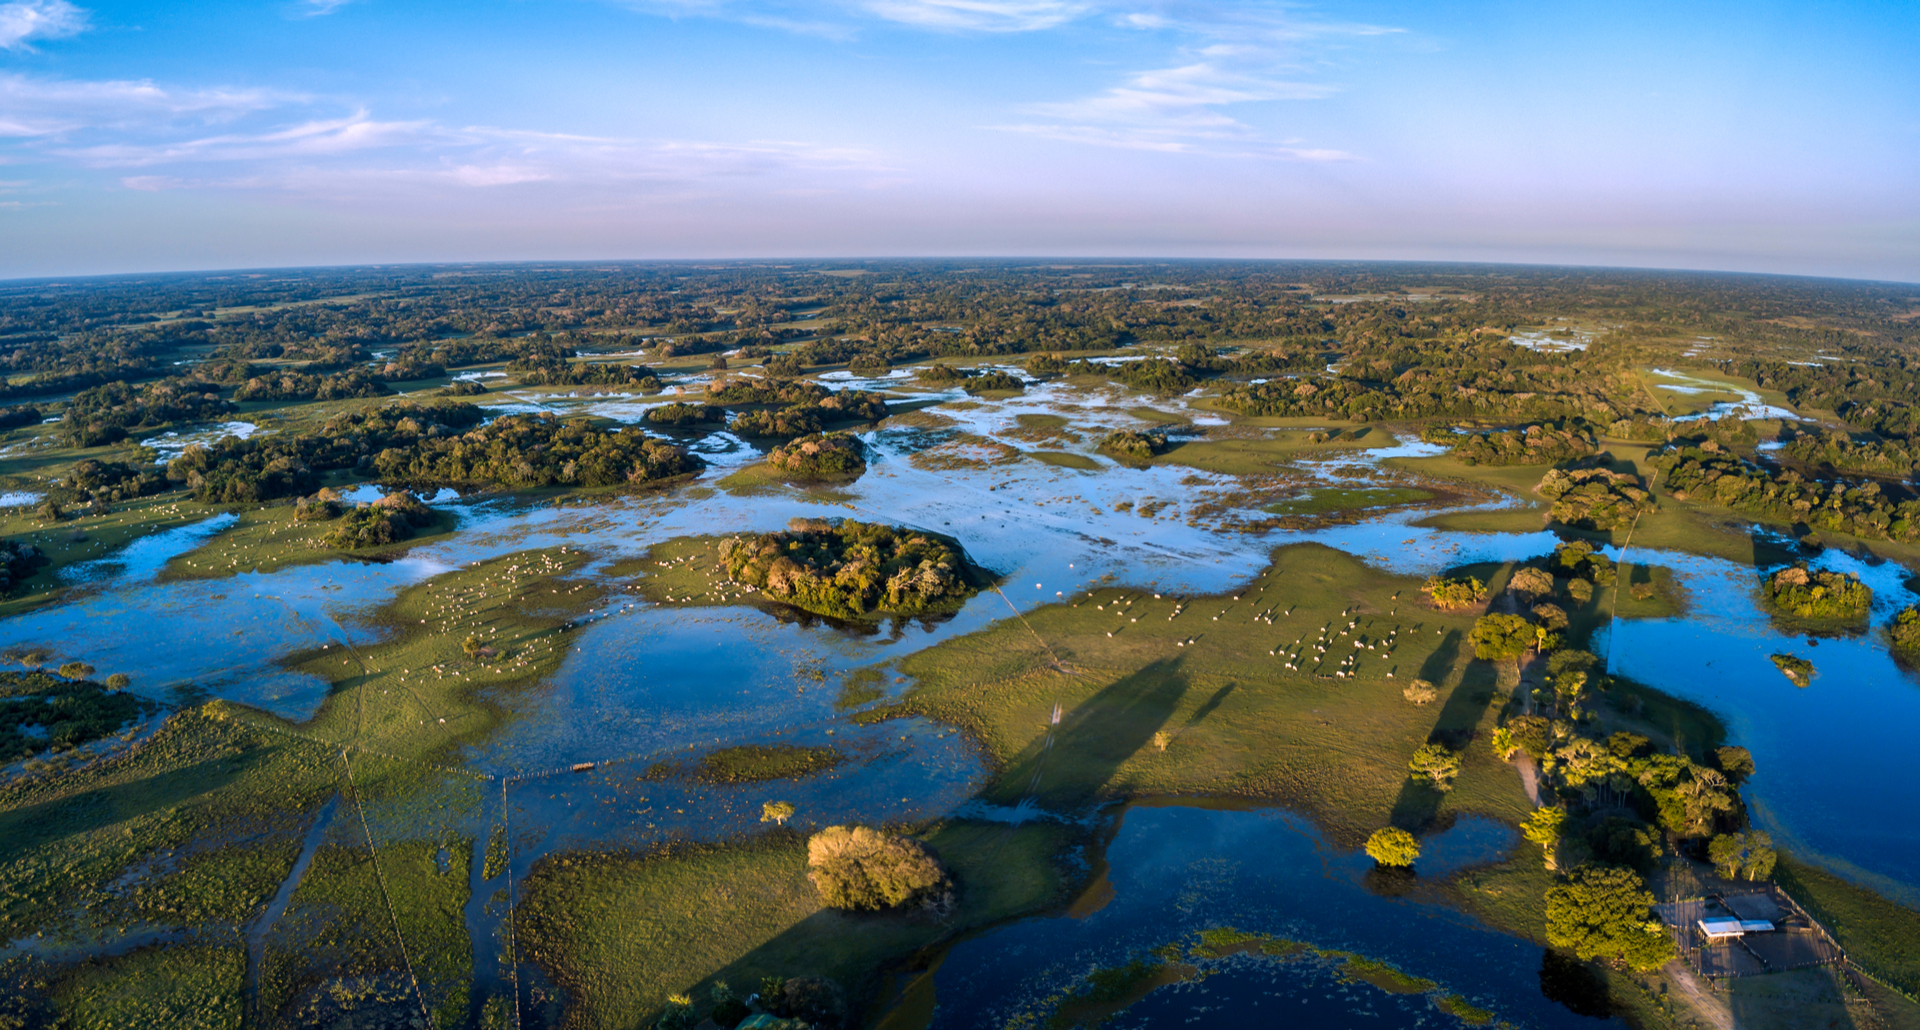 An aerial view of the Pantanal wetland photographed in Corumba, Mato Grosso do Sul